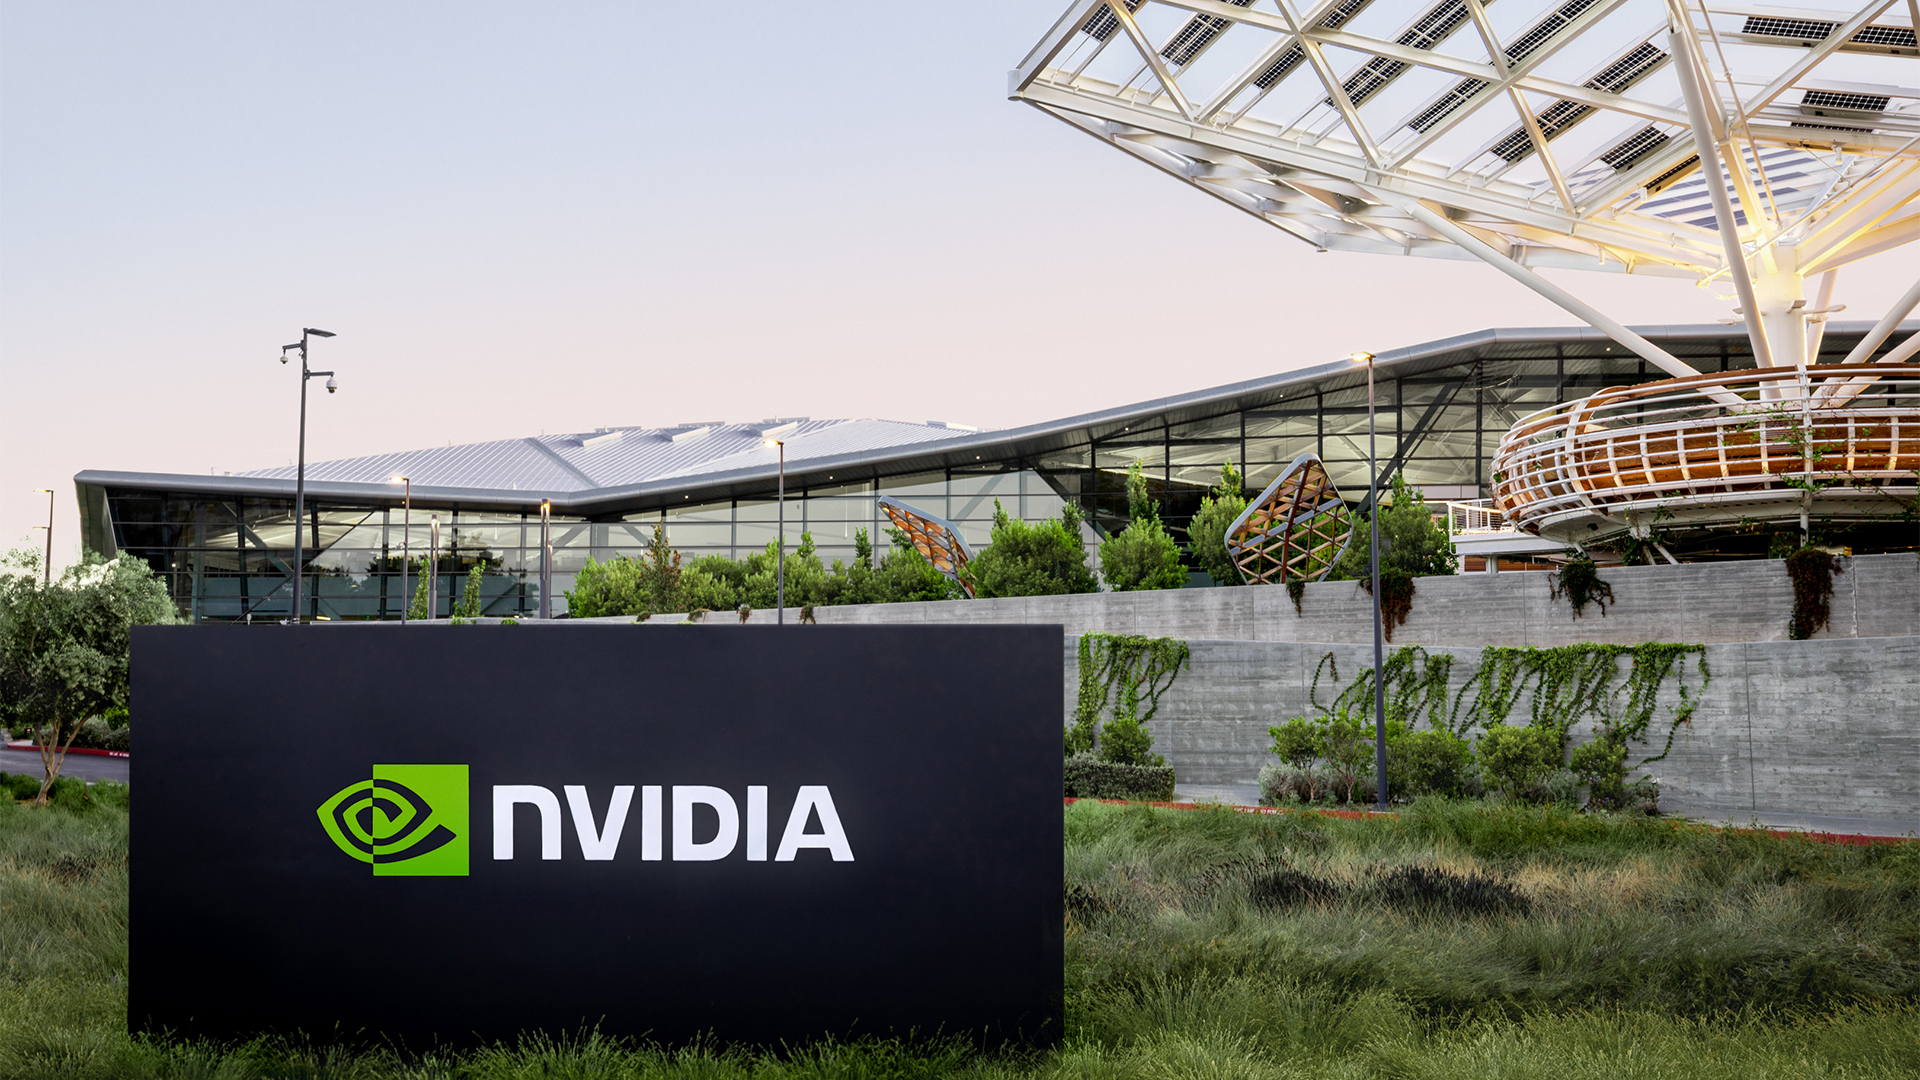 Former AMD GPU head accuses Nvidia of being a 'GPU cartel' in response to reports of retaliatory shipment delays